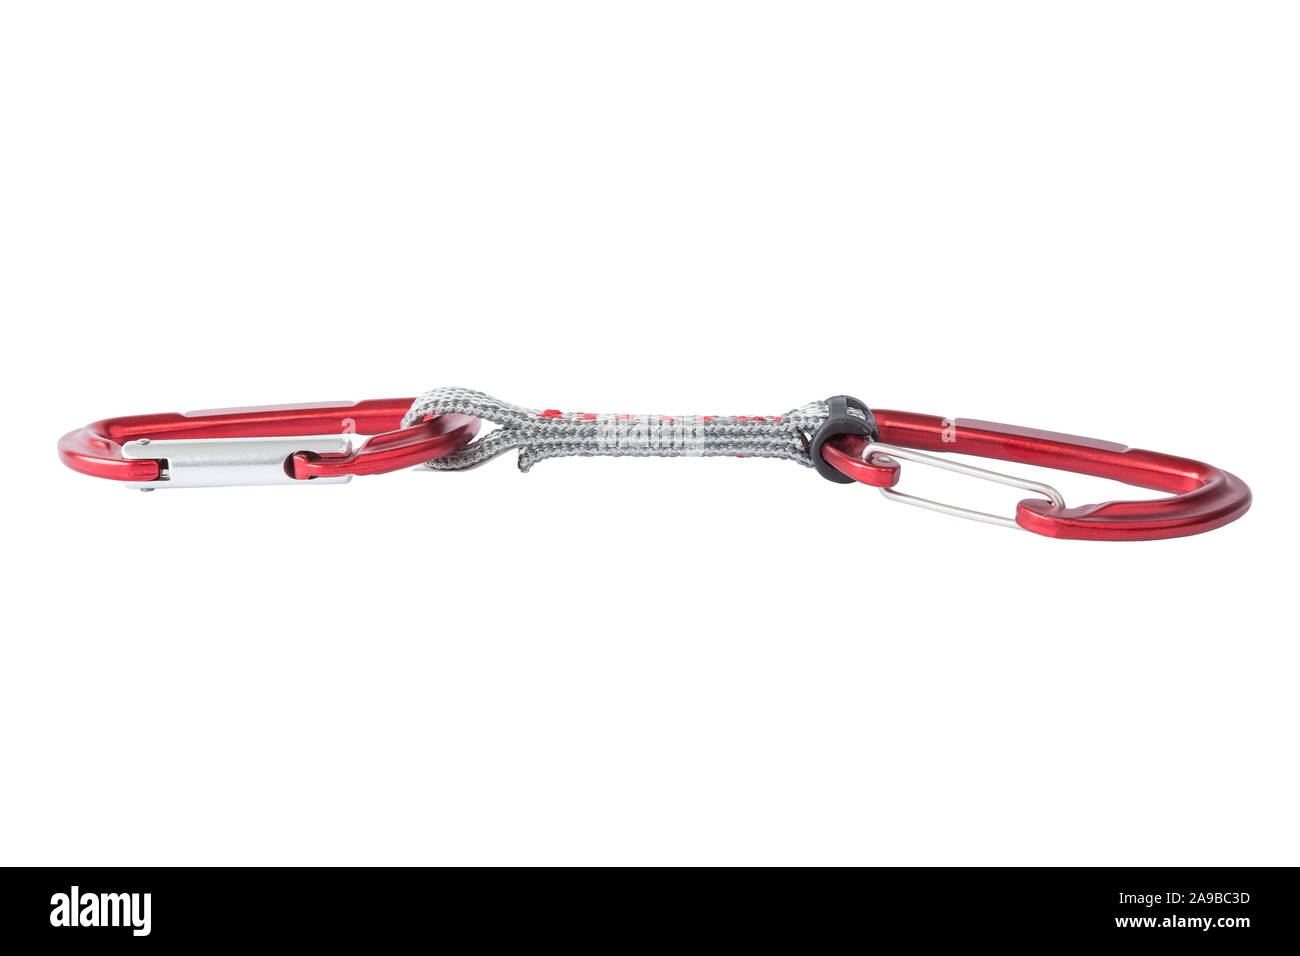 Close-up of a single red metal quickdraw carabiner for mountain and sport climbing, isolated on white background. Stock Photo